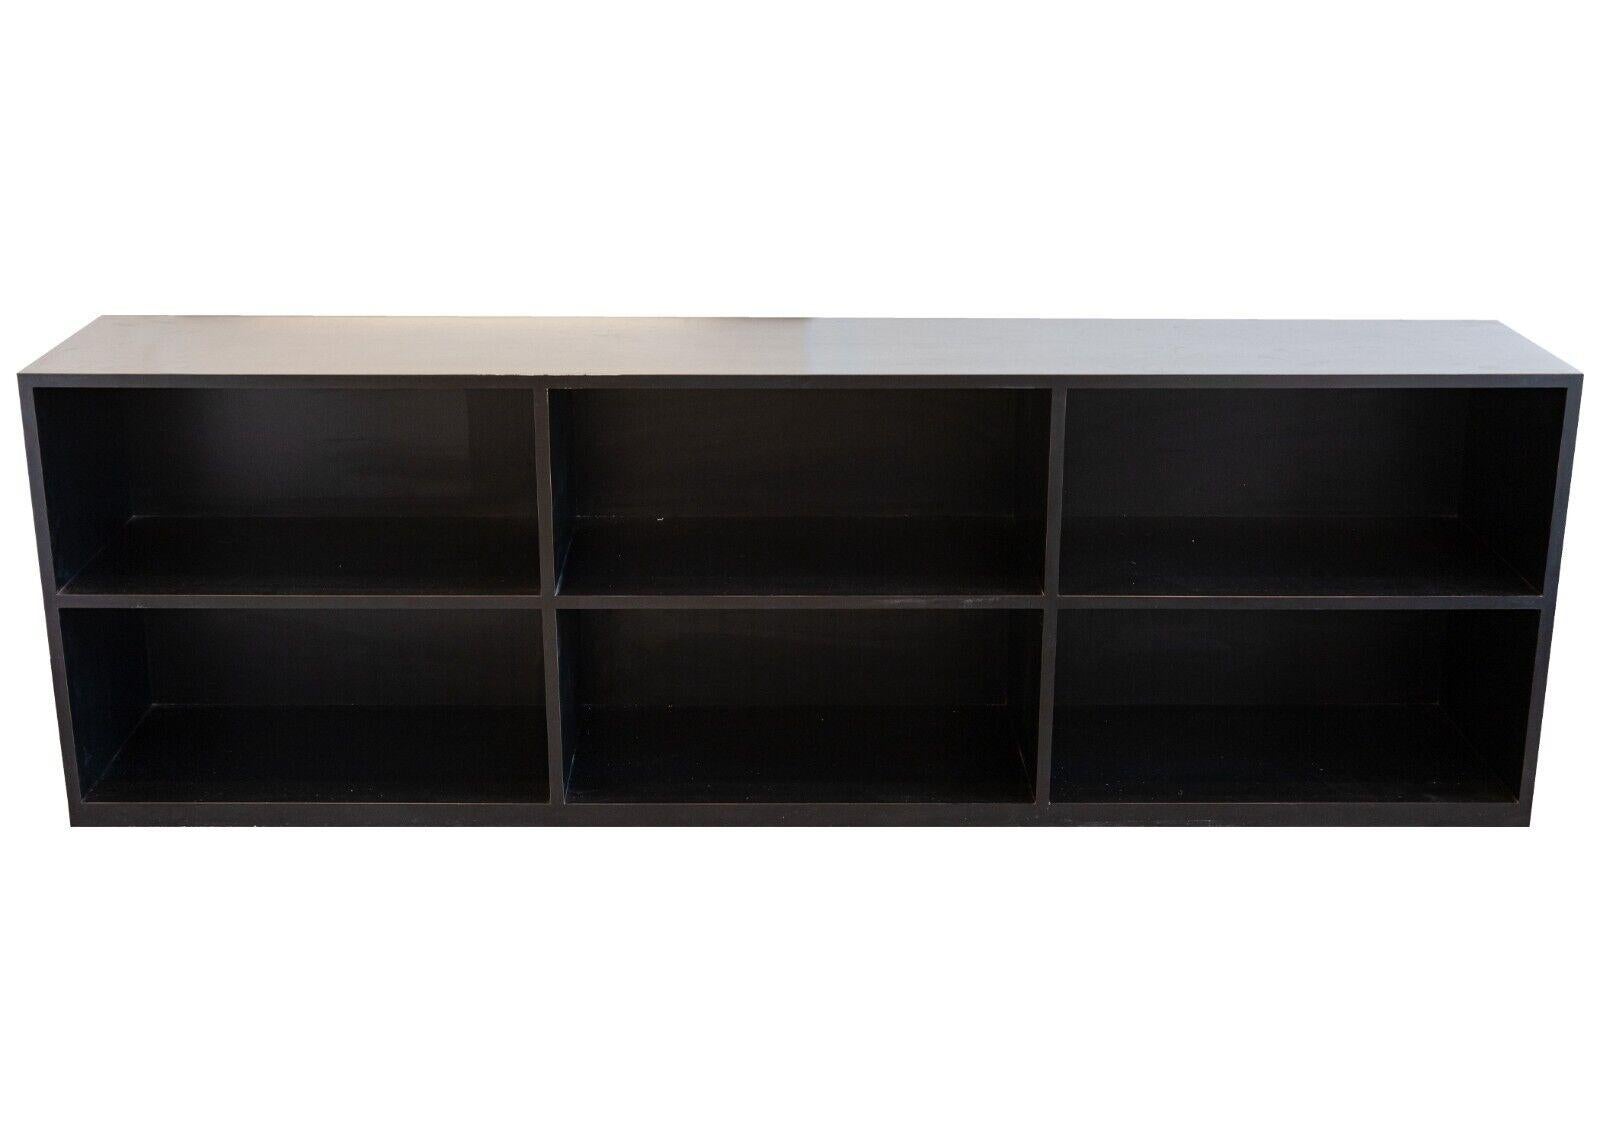 A large black shelving unit. This versatile shelving unit is a great addition to any room. Its very dark black coloring makes it usable in a great variety of spaces and styles. It contains 6 shelves and a large flat top. This piece is in very good